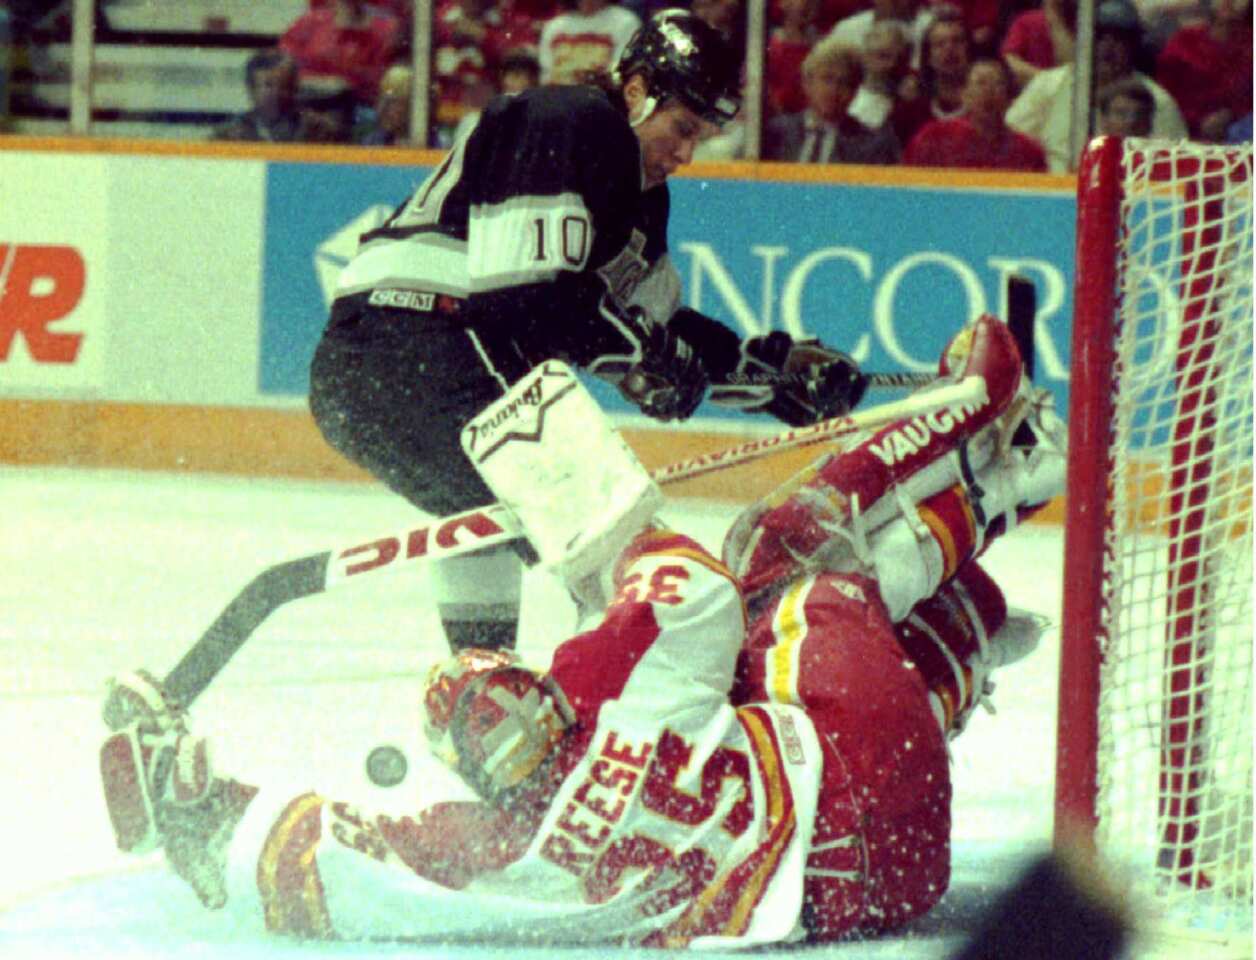 Calgary goalie Jeff Reese makes a save on a shot by Kings left wing Warren Rychel during the Kings' 9-4 victory in Game 5 of the Smythe Division semifinals. The Kings, which finished third behind Vancouver and Calgary in the division during the regular season, defeated the Flames in six games.